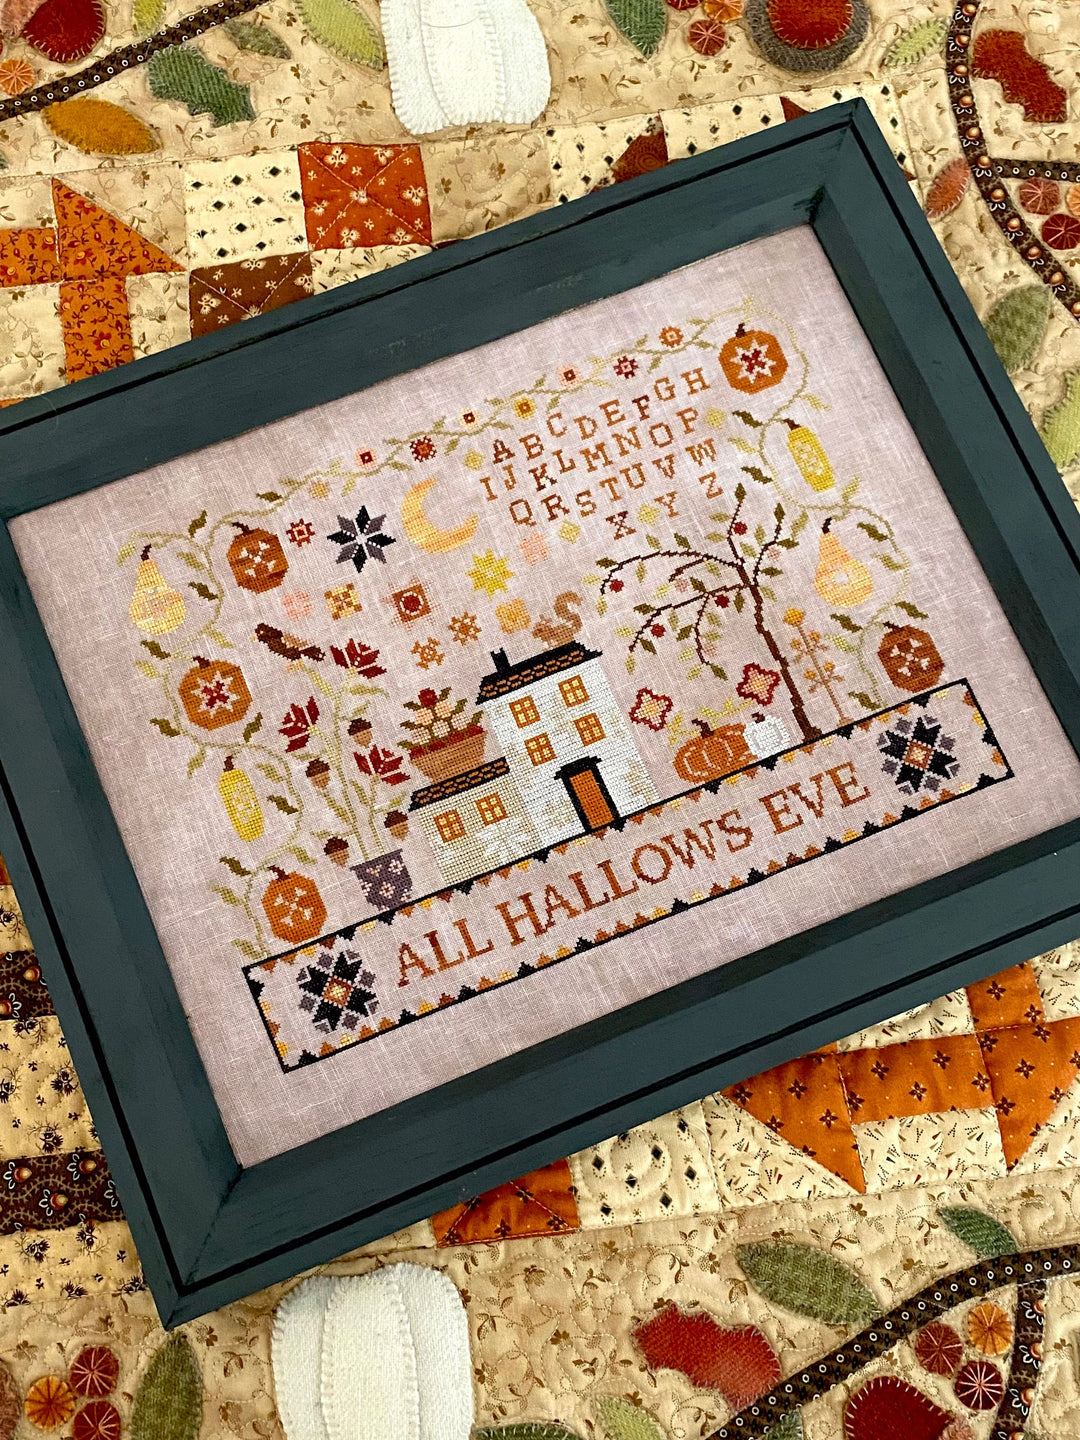 Pre-Order: All Hallows Eve *market exclusive* | Blueberry Ridge Designs (Nashville Market - ships in March)